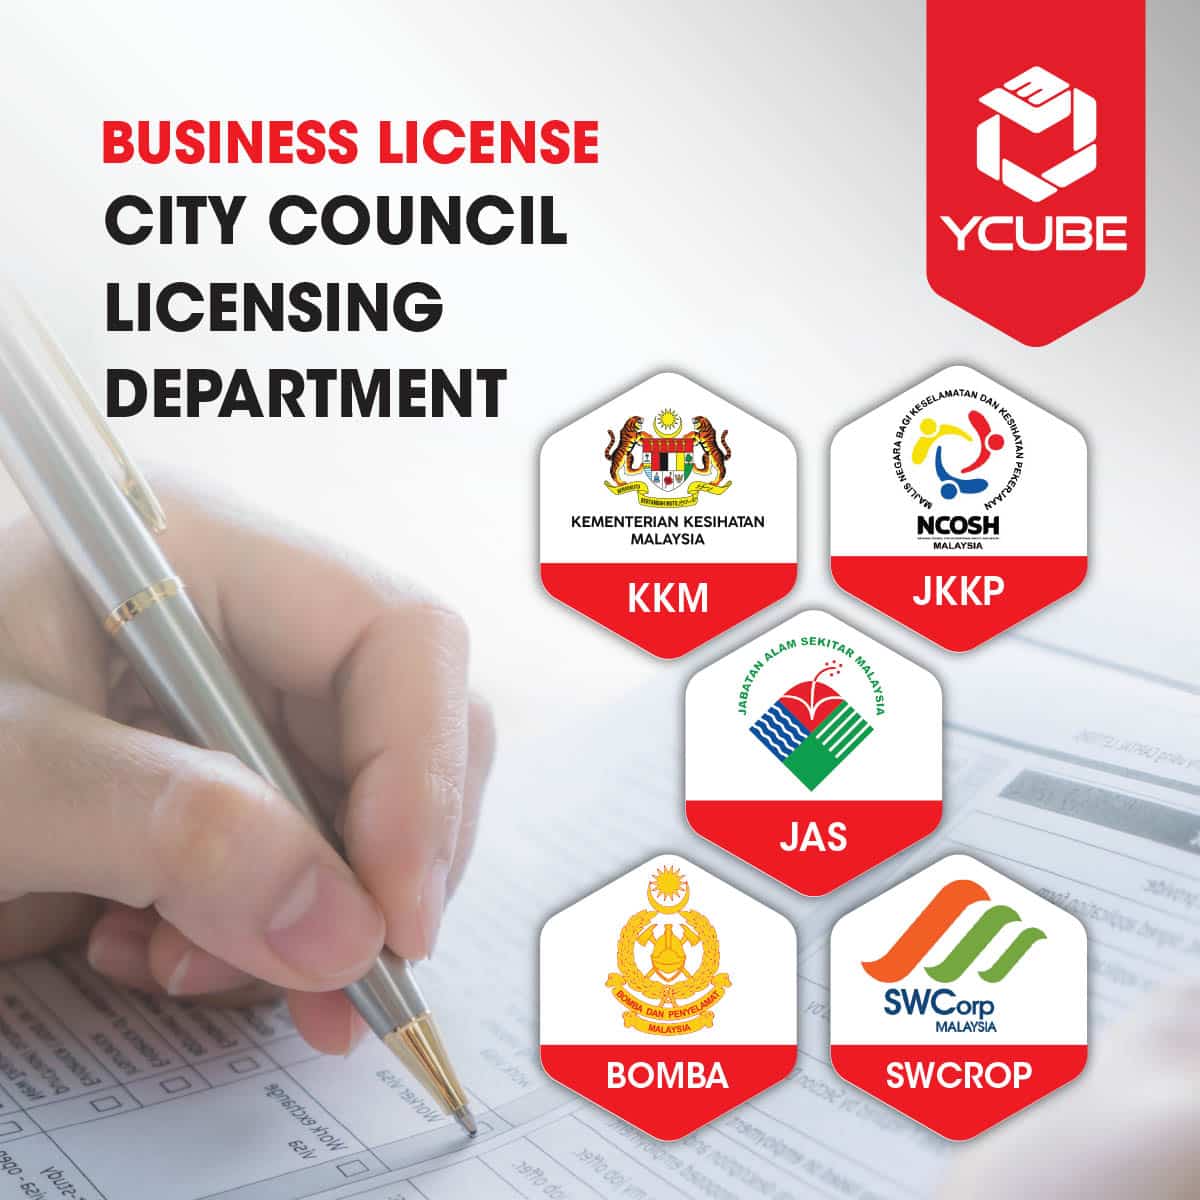 220728_YcubeDesign_Business License_FA